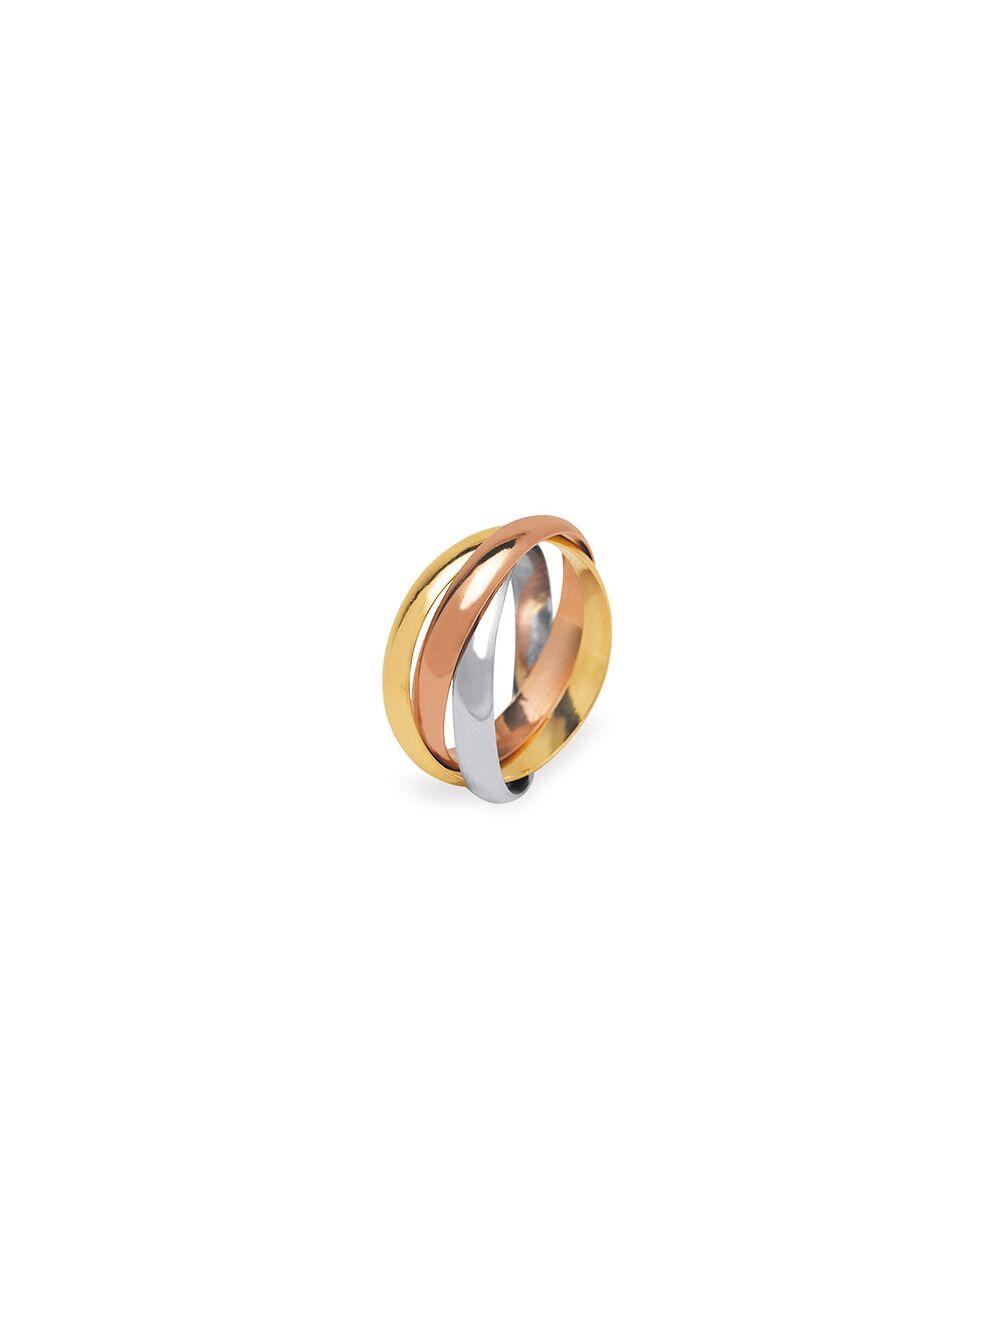 # 18K yellow gold, 18K white gold and 18K rose gold rings